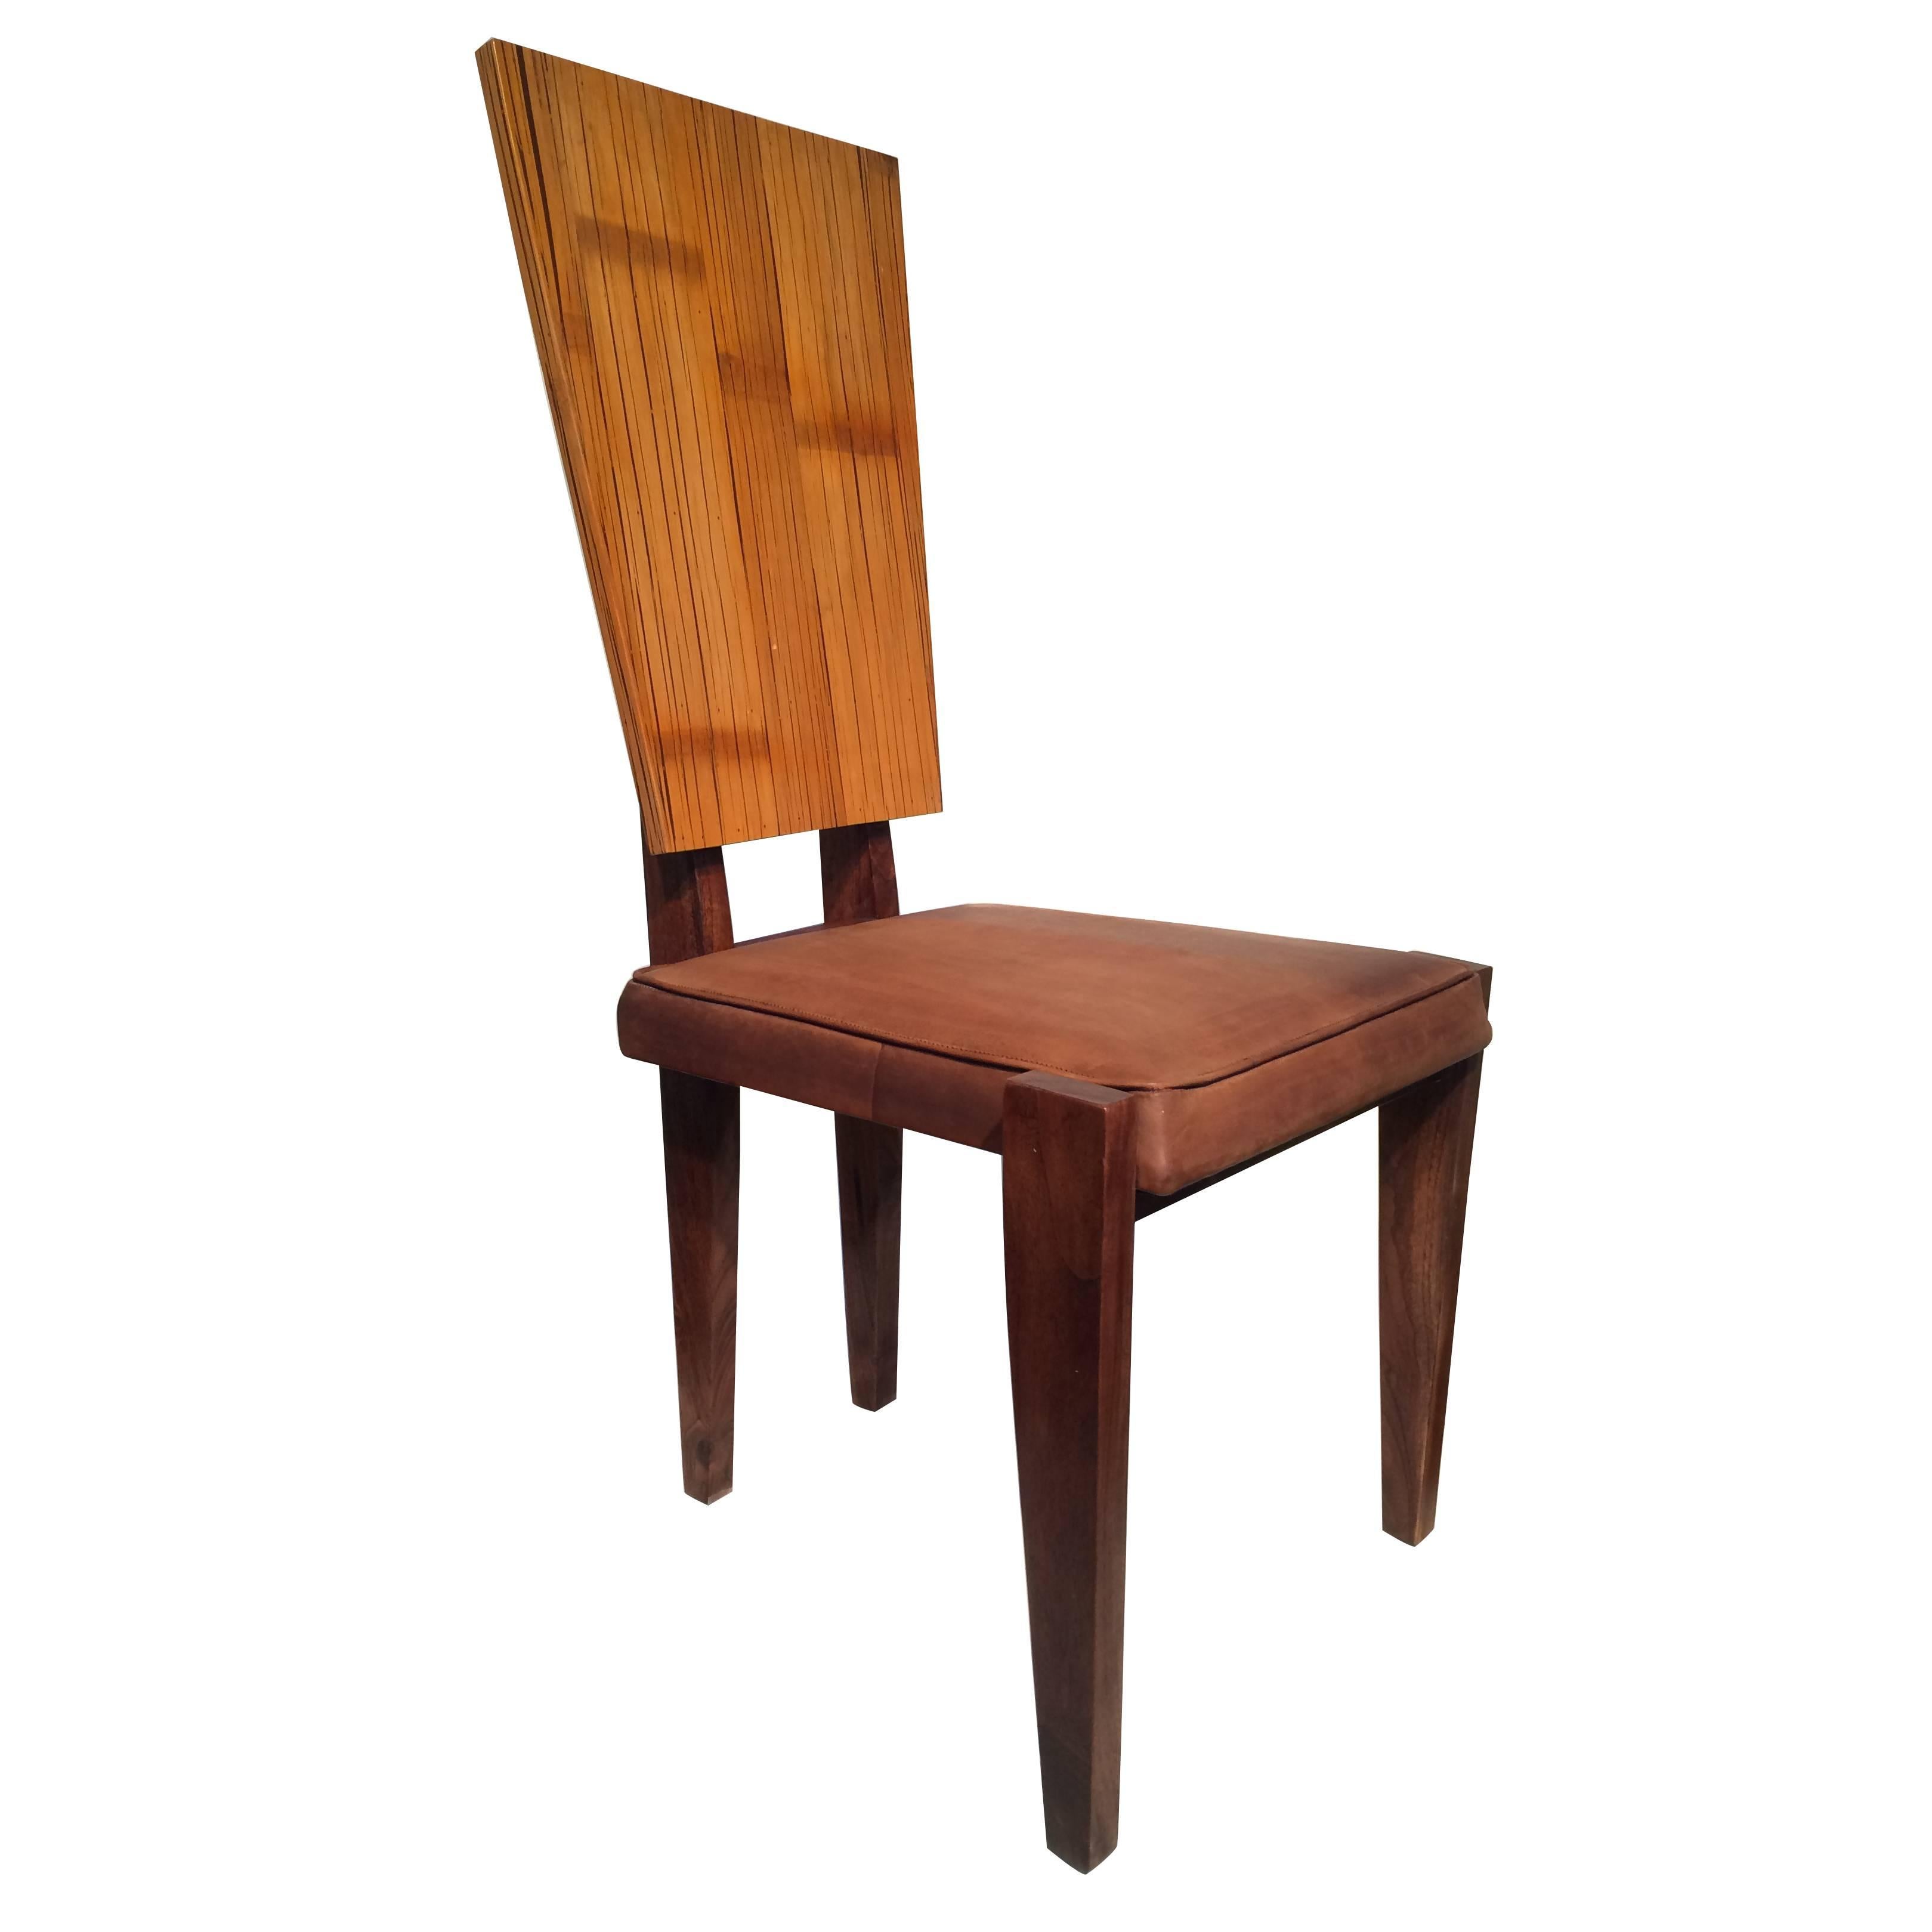 A chair by Andre Sornay. bamboo veneered back with walnut frame and leather upholstery, France, 1940.